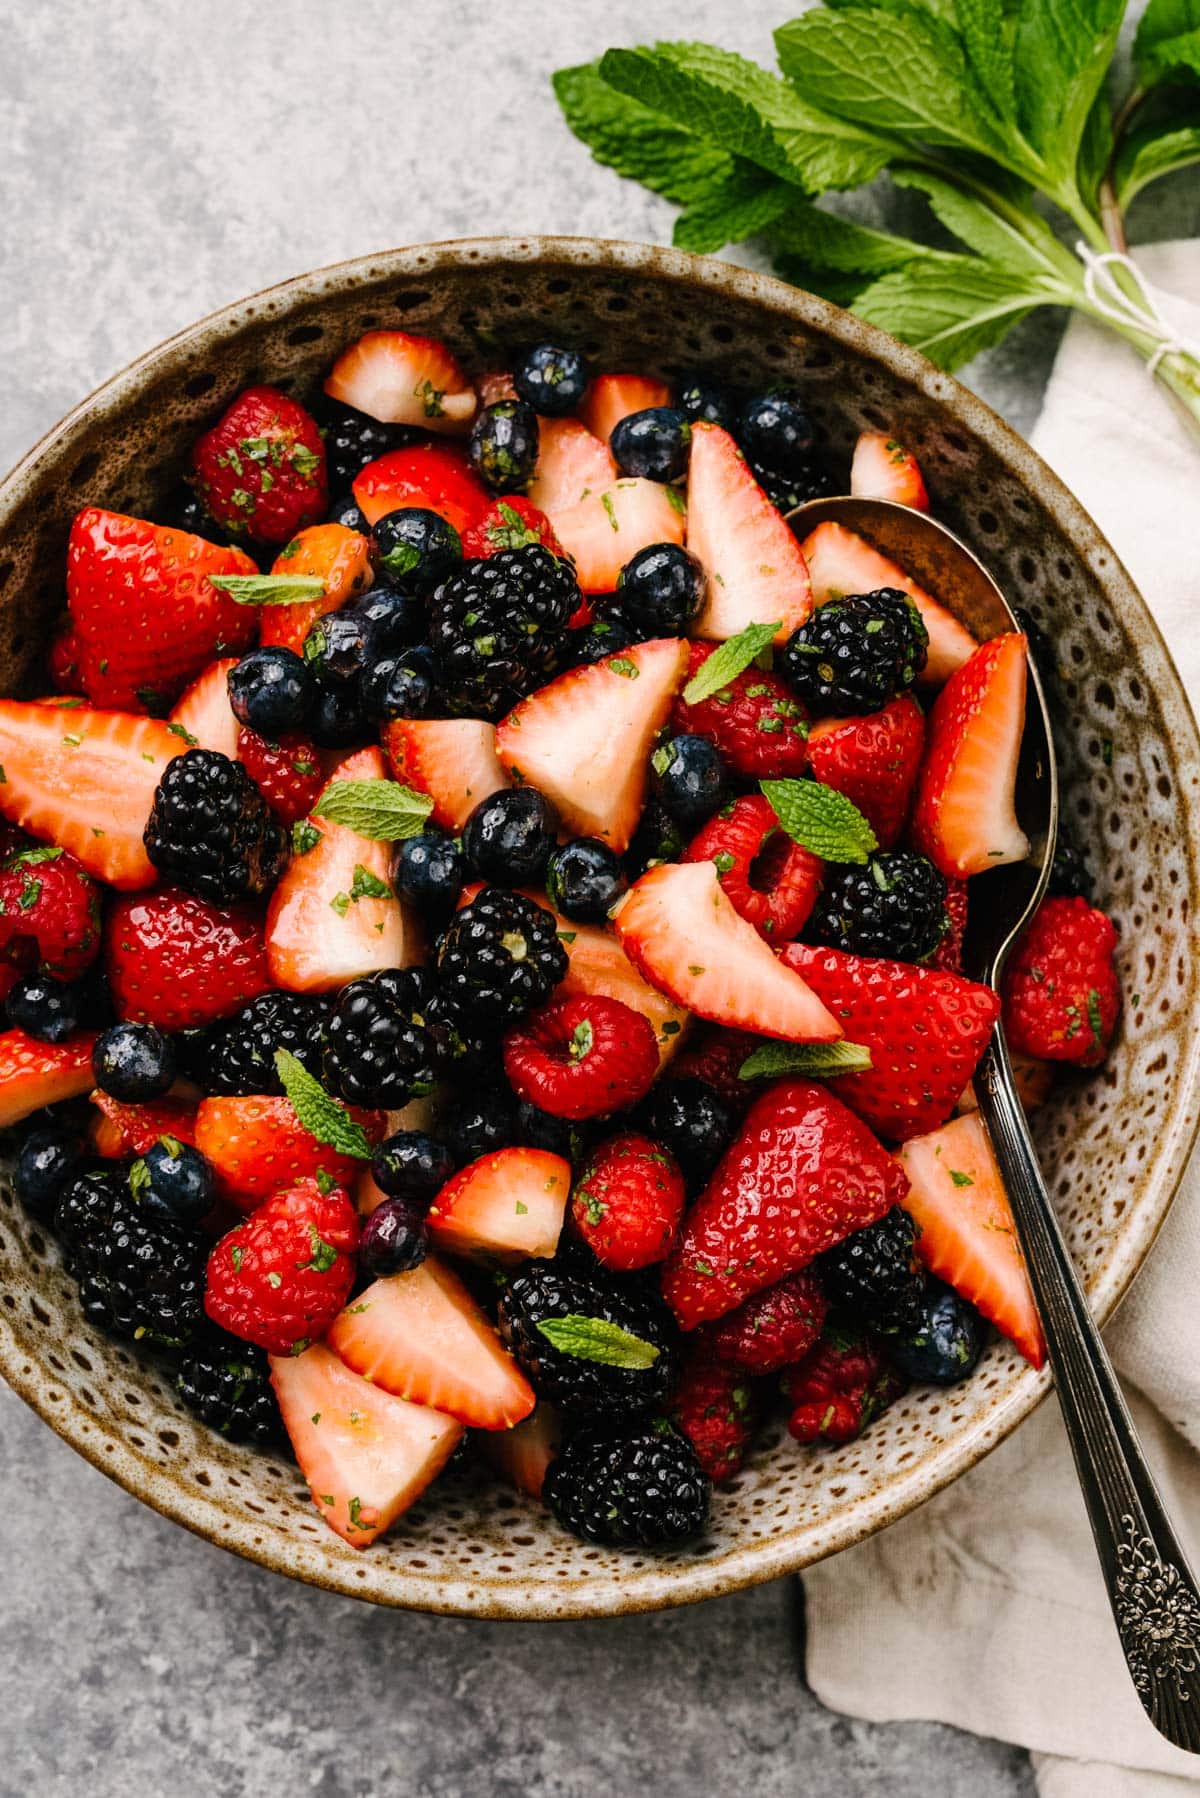 Berry fruit salad with strawberries, blueberries, blackberries, and raspberries tossed with honey mint dressing in a brown speckled bowl on a concrete background; cream linen napkin and bundle of fresh thyme to the side.